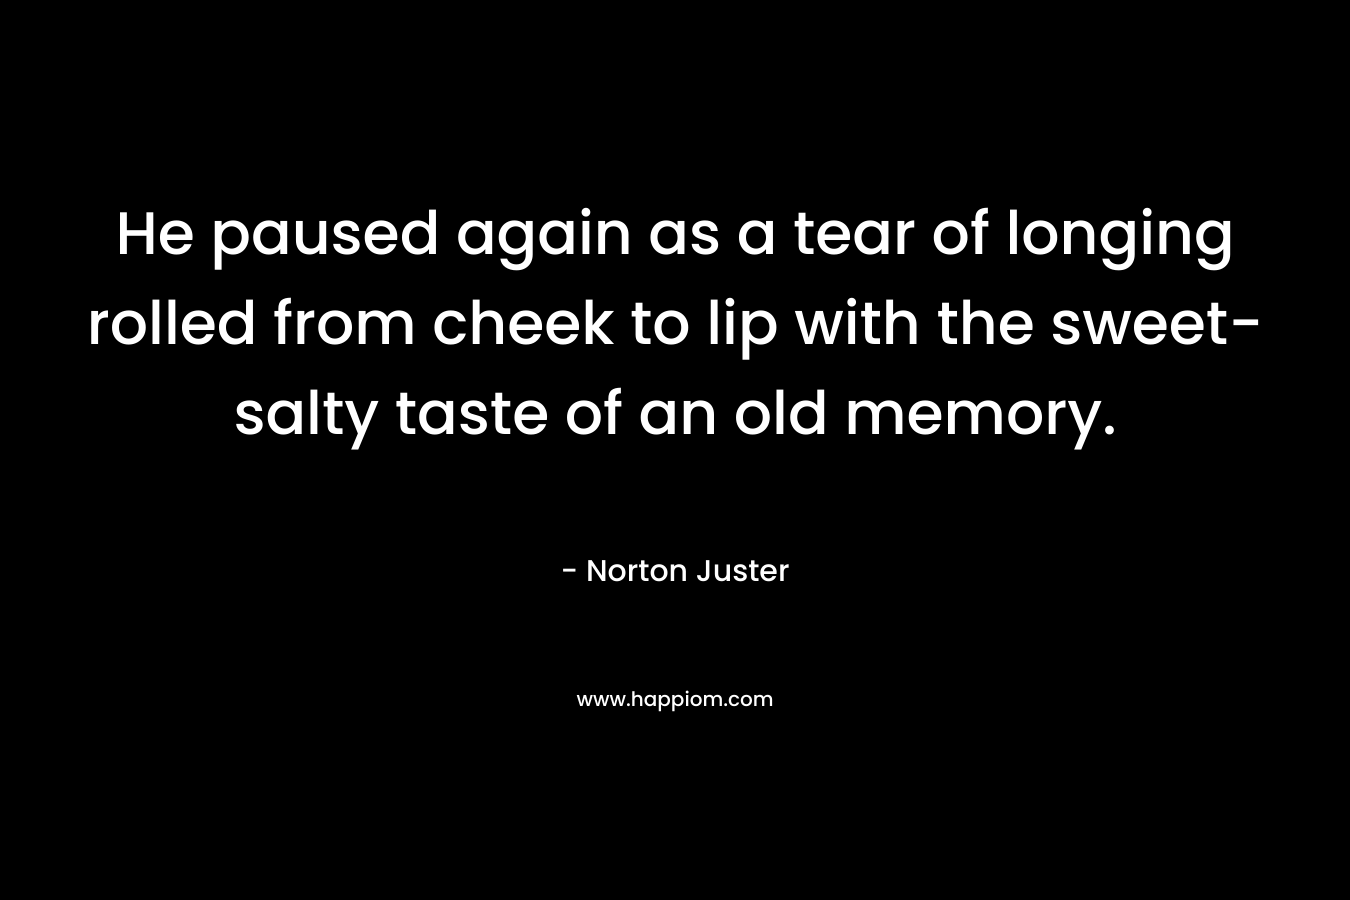 He paused again as a tear of longing rolled from cheek to lip with the sweet-salty taste of an old memory. – Norton Juster